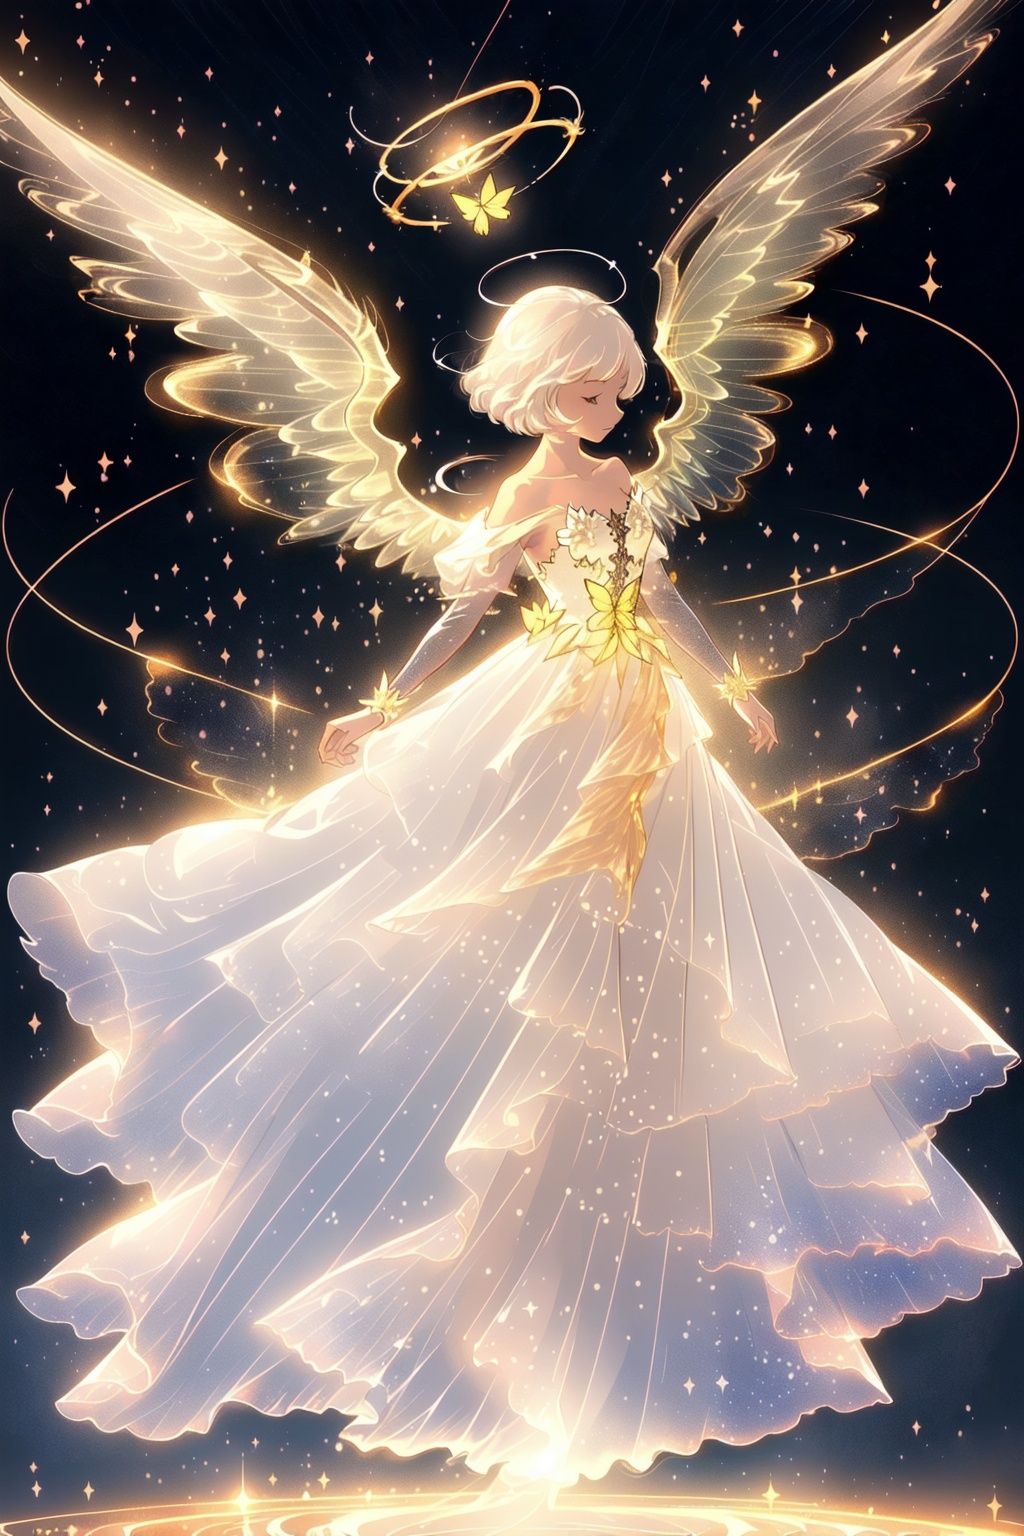  Best quality, 8k, cg,A girl formed by light,solo,glowing,light,A dress formed by light,starry_background,Angel wings formed by light,front,halo,bare_shoulders,hirschgeweih_antennas,magic,glowing_butterfly